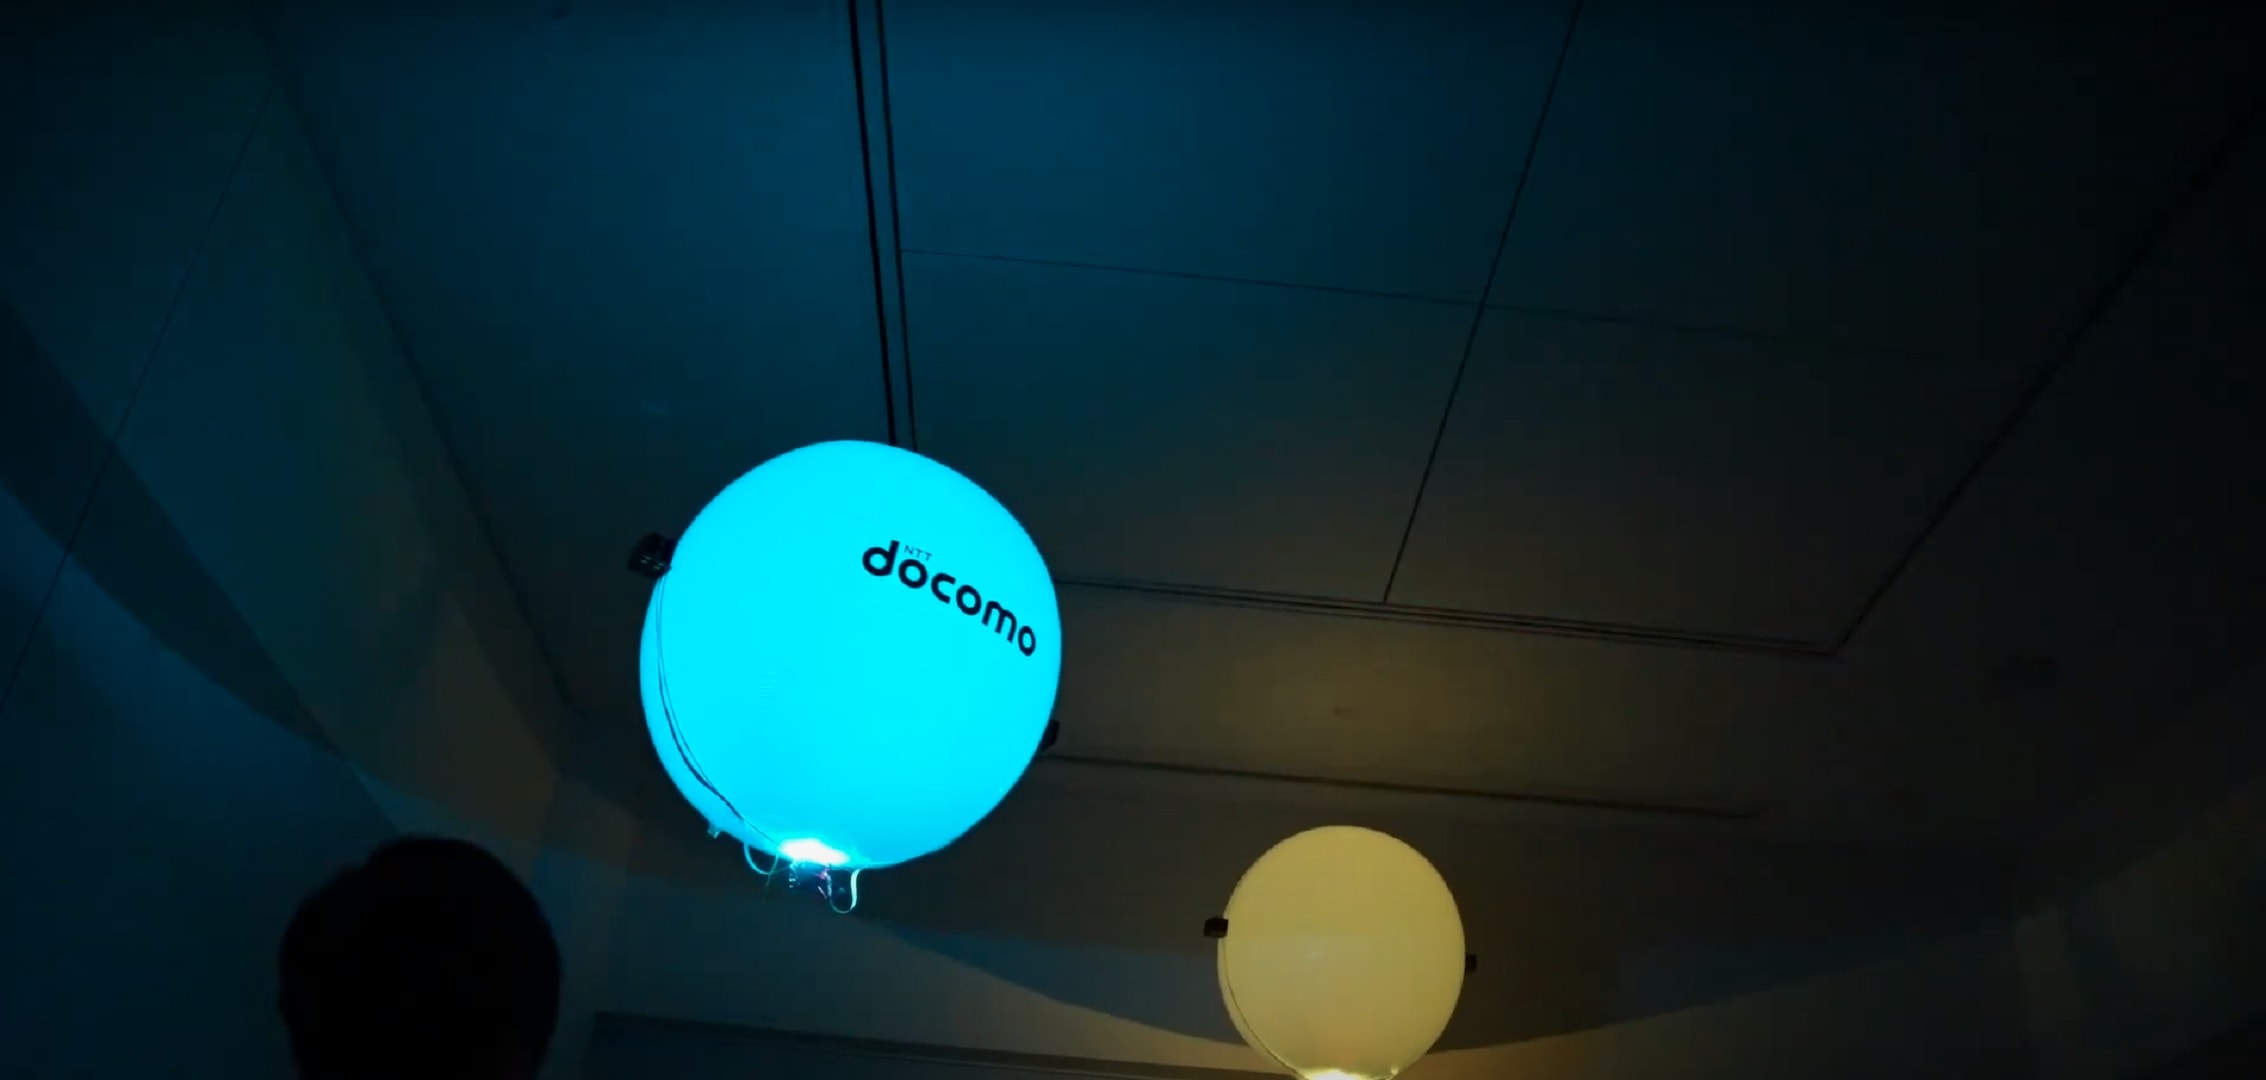 Japanese Made Drone Is A Glowing Balloon Propelled By Ultrasonic Vibrations Has No Blades Autoevolution